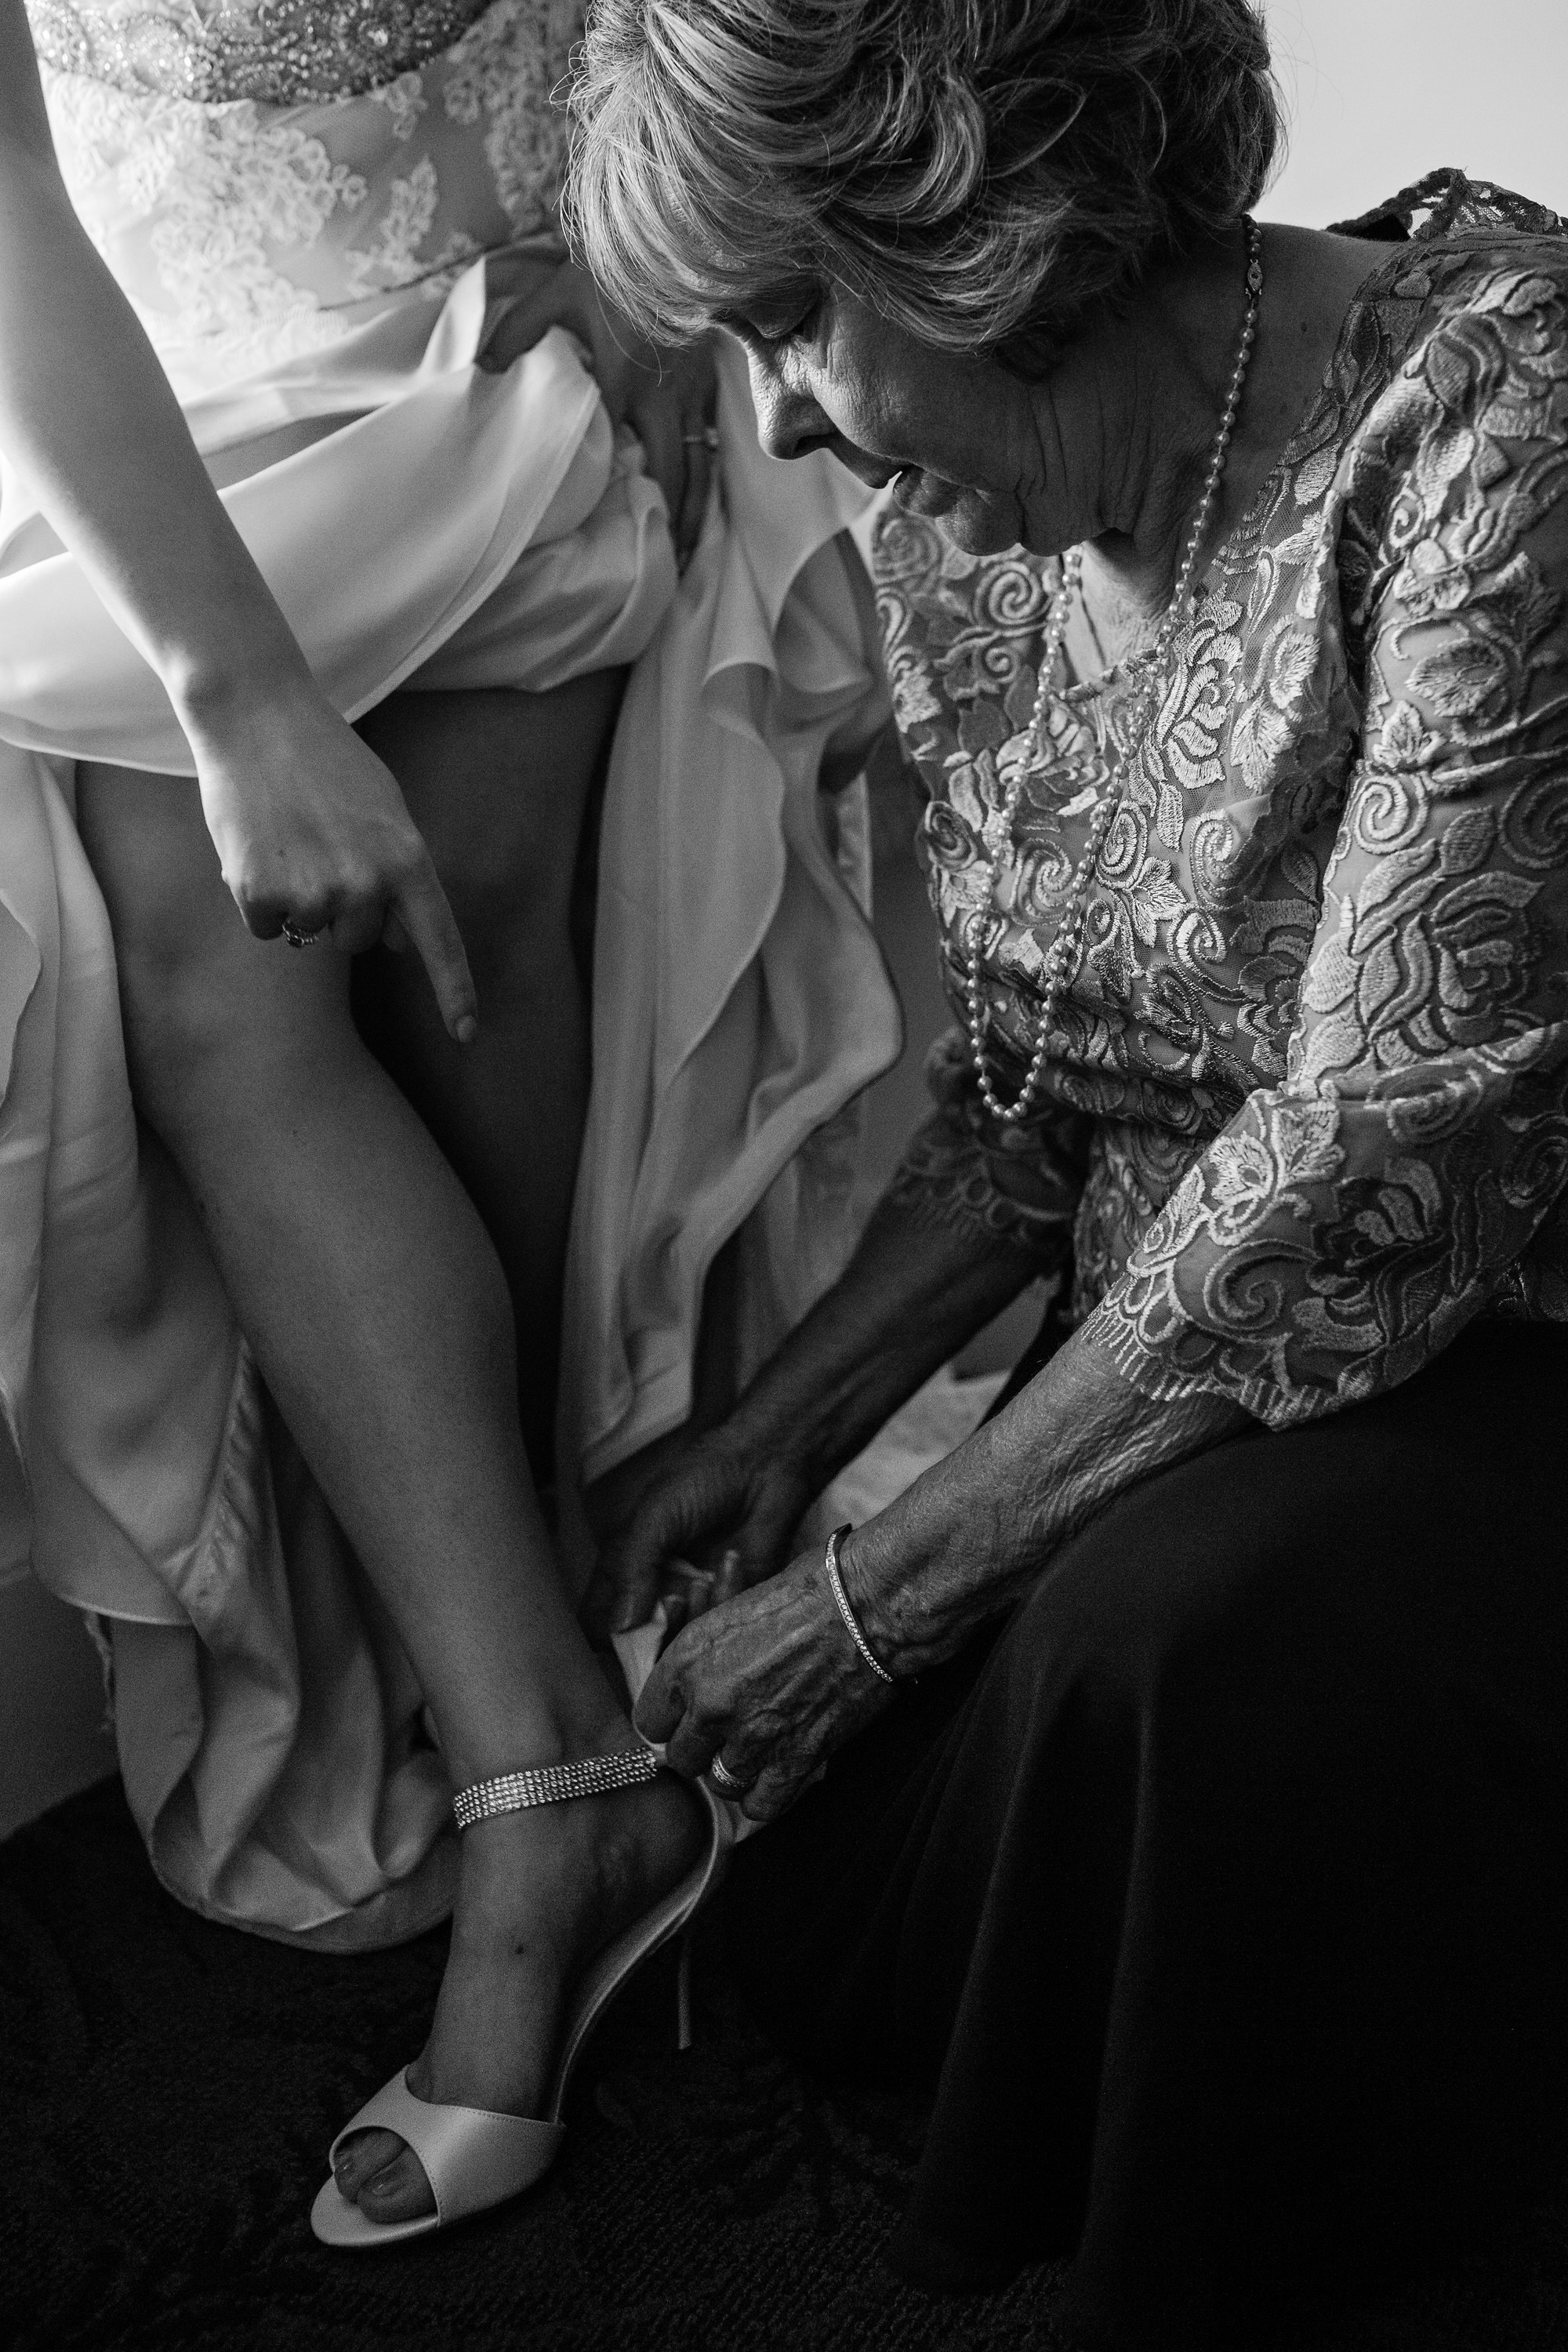 A grandmother helps her granddaughter become a bride on her wedding day in Bar Harbor Maine.